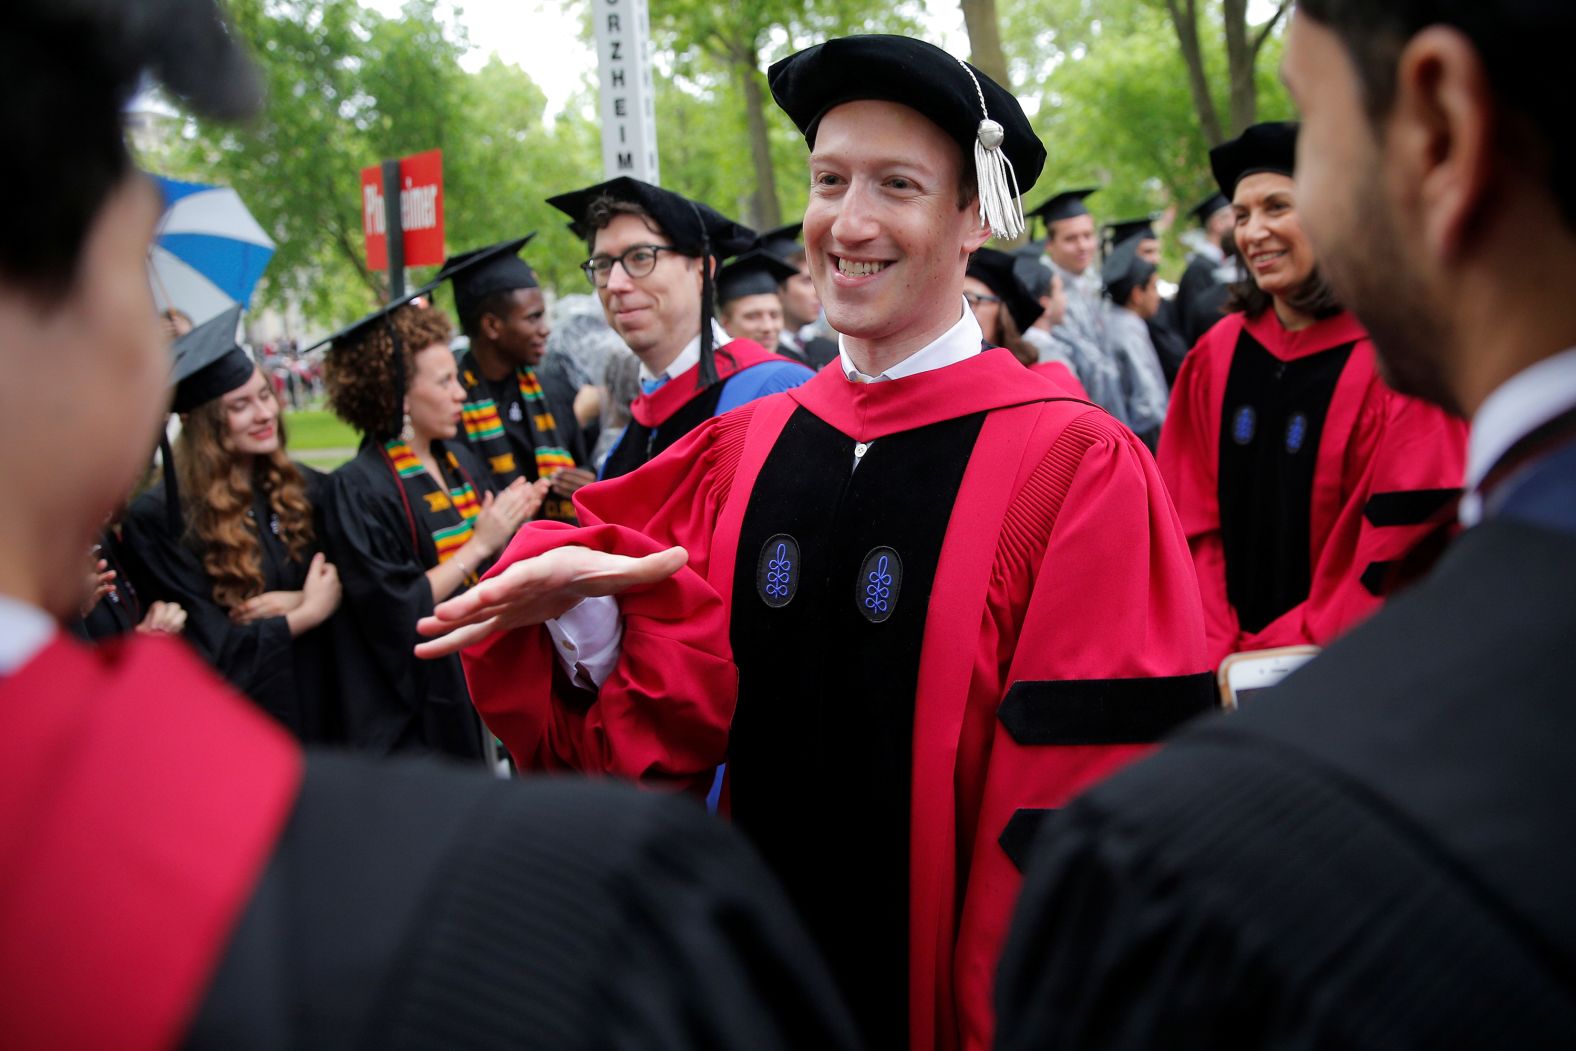 Zuckerberg greets graduating students before receiving an honorary degree at Harvard in 2017. Zuckerberg famously dropped out of Harvard to focus on building Facebook.